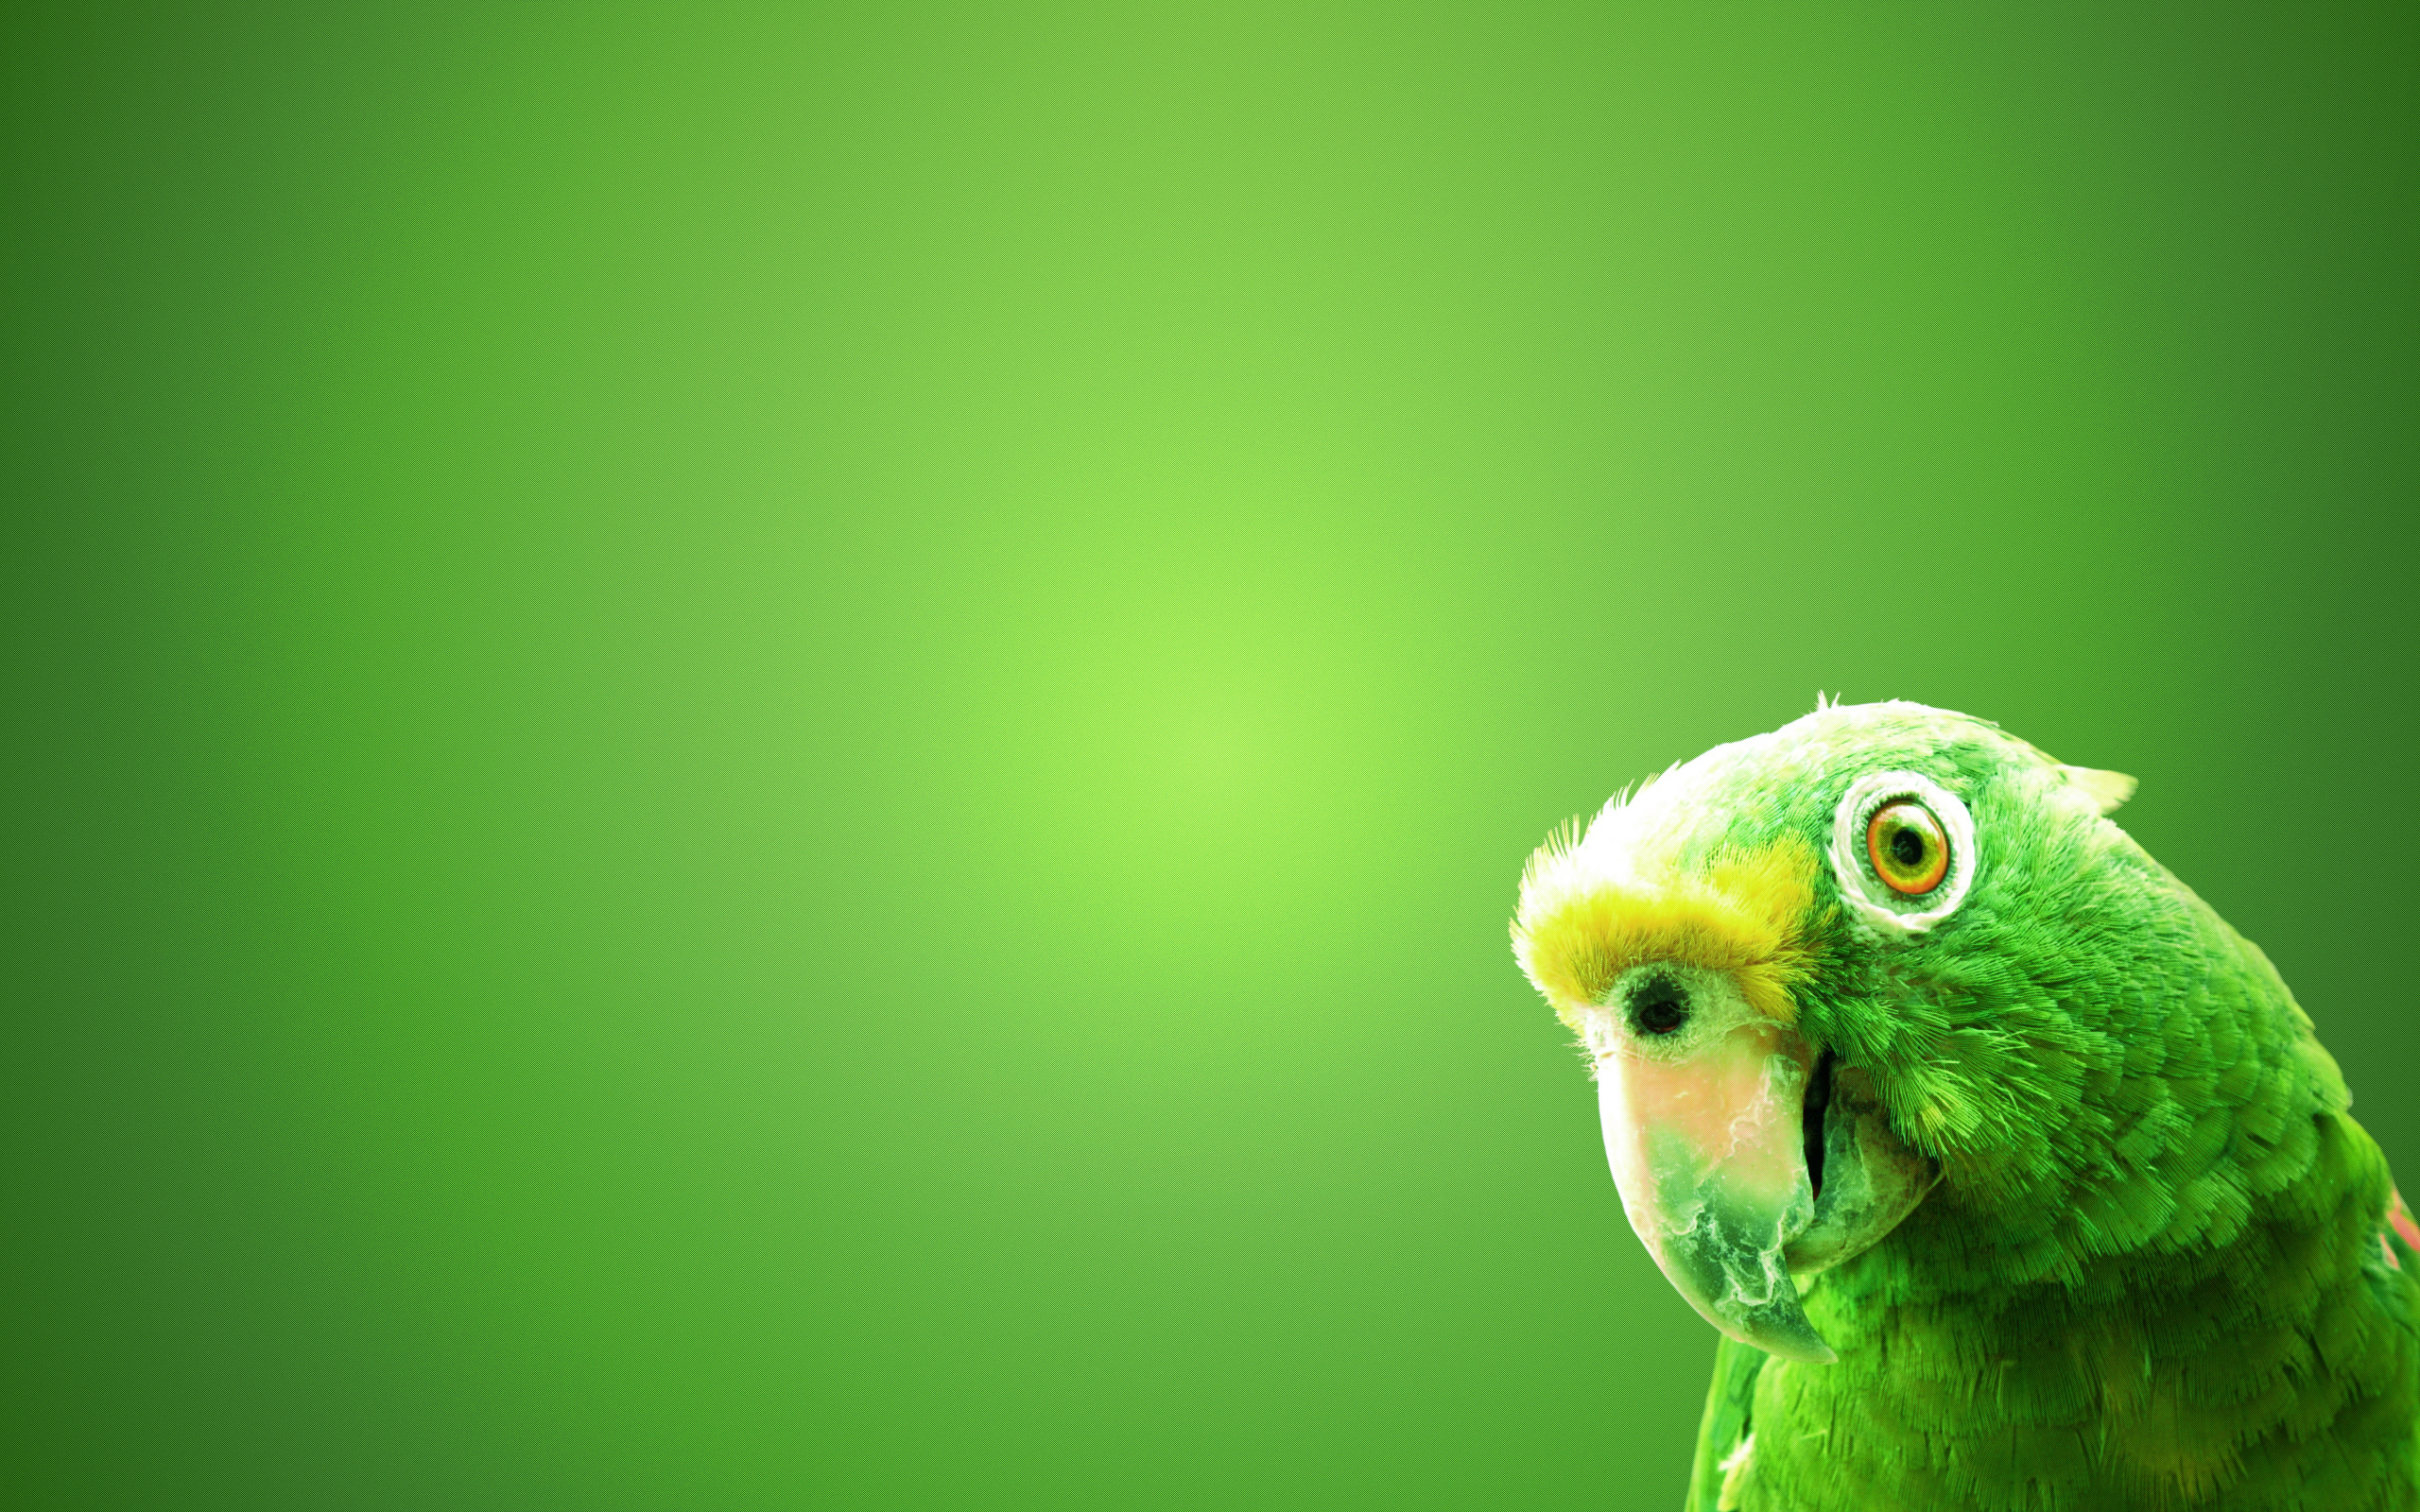 wallpaper of animals a green parrot on the green screen click to